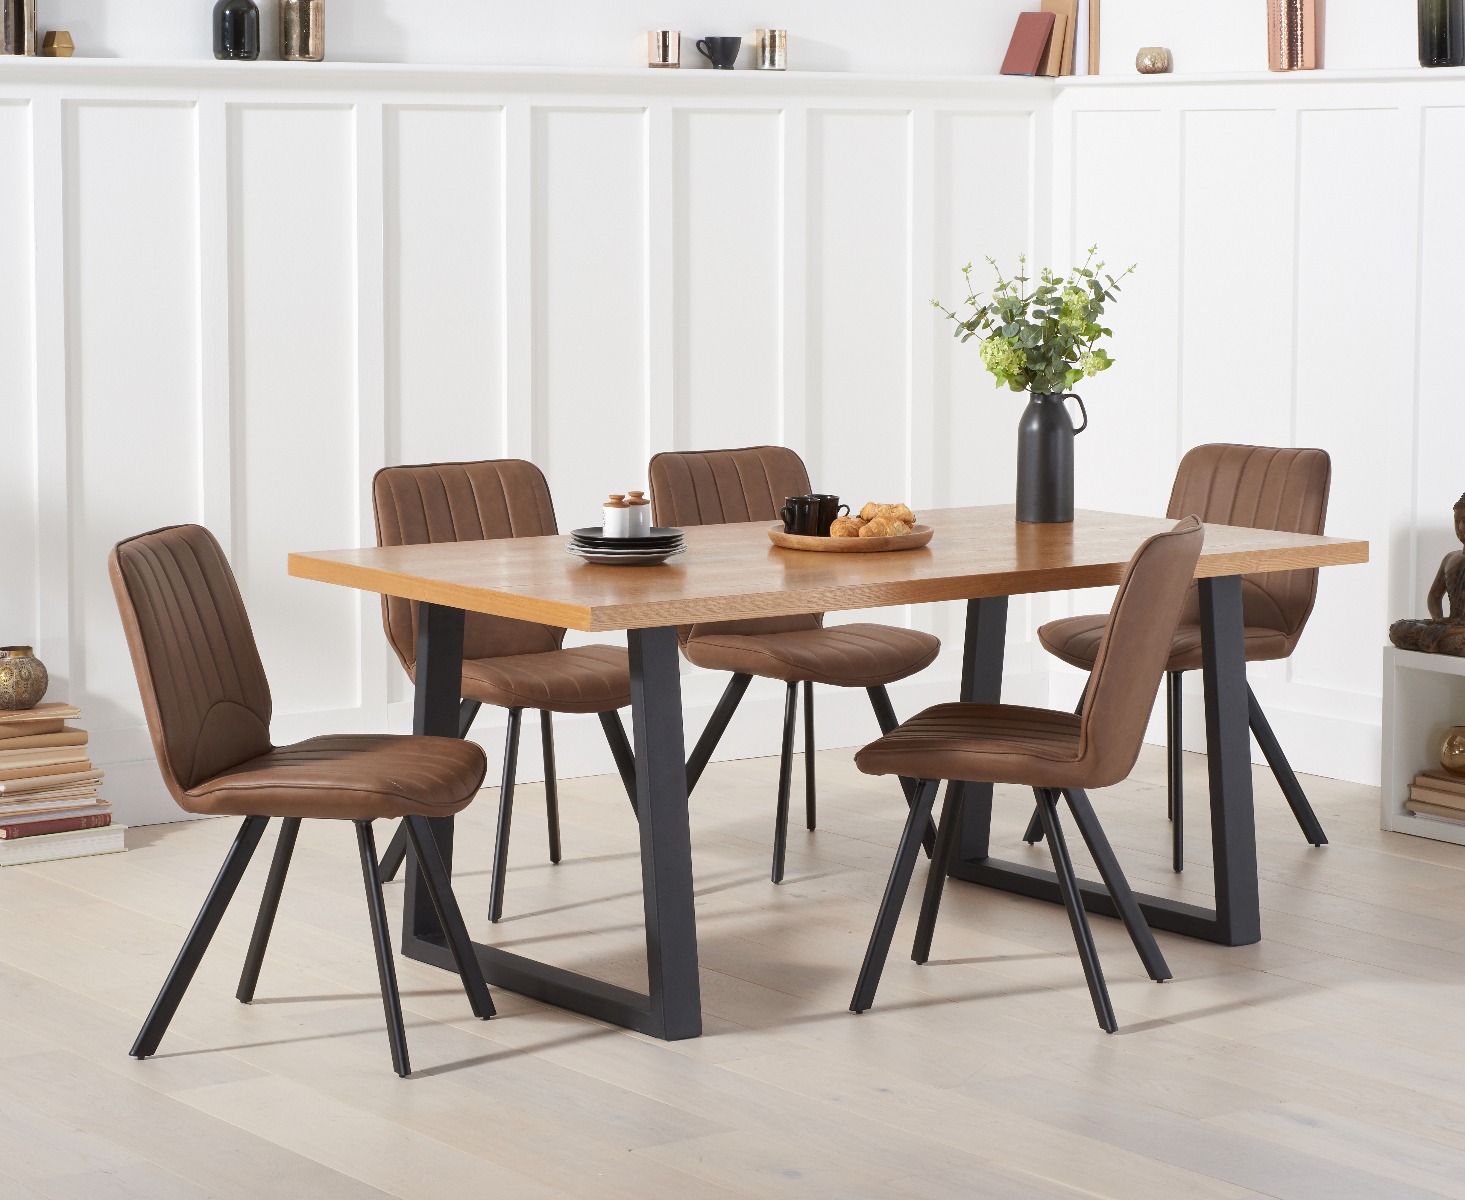 Photo 1 of Urban 180cm ash and veneer industrial dining table with 8 grey hendrick chairs